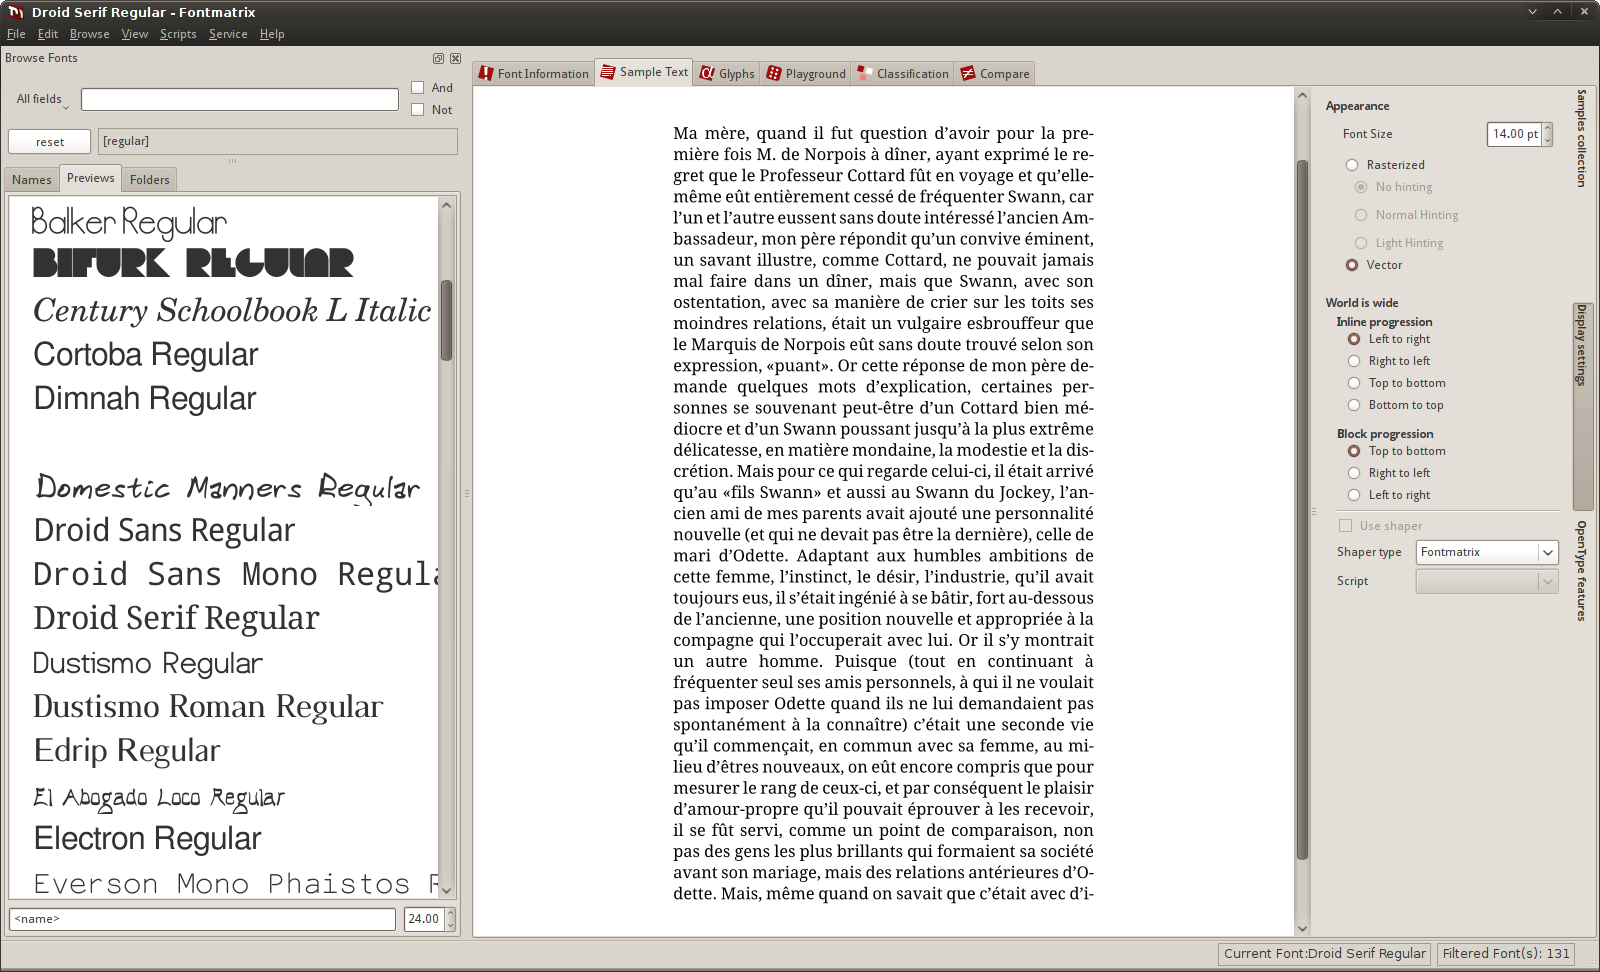 Sample text view